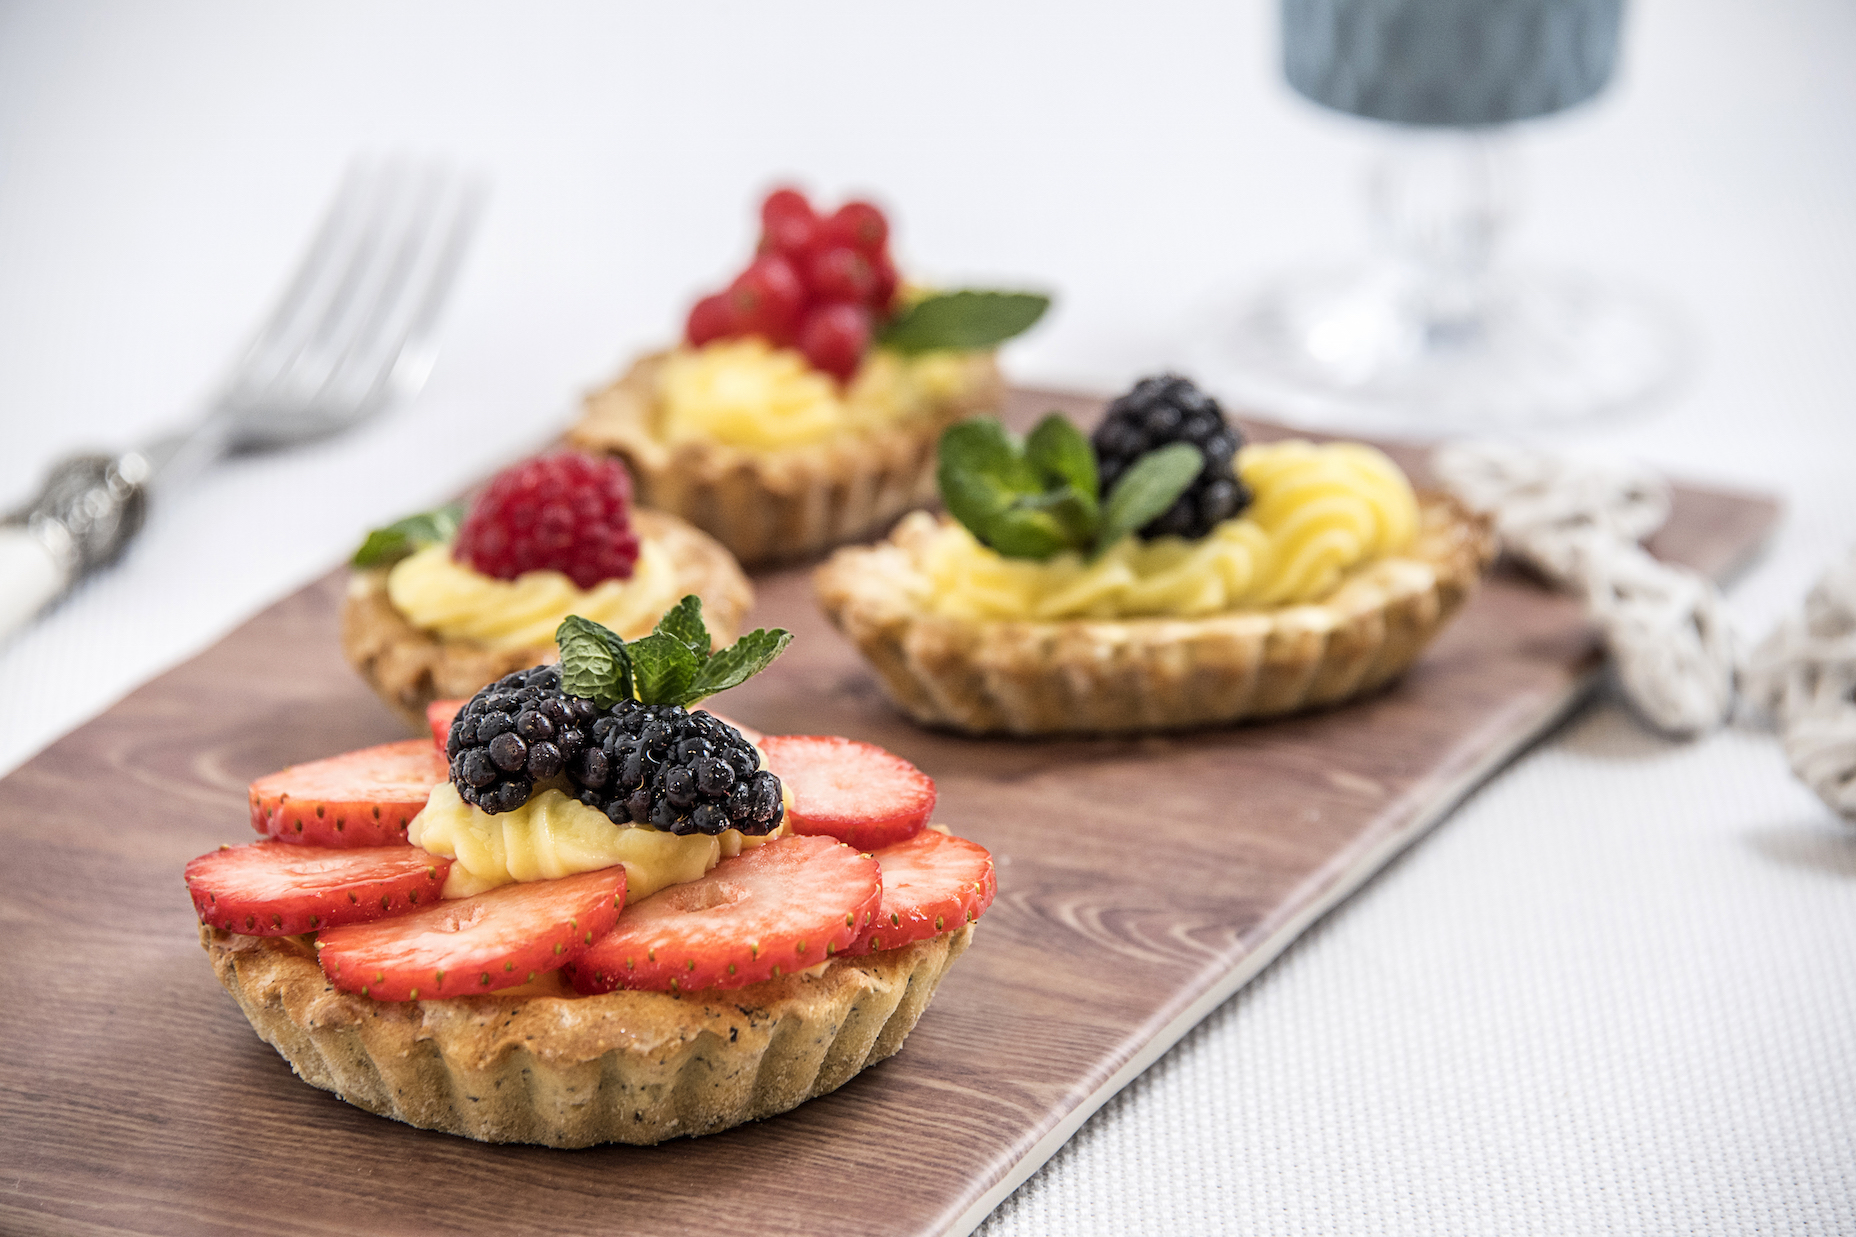 Gluten-free wholemeal tartlets with cream and fruit